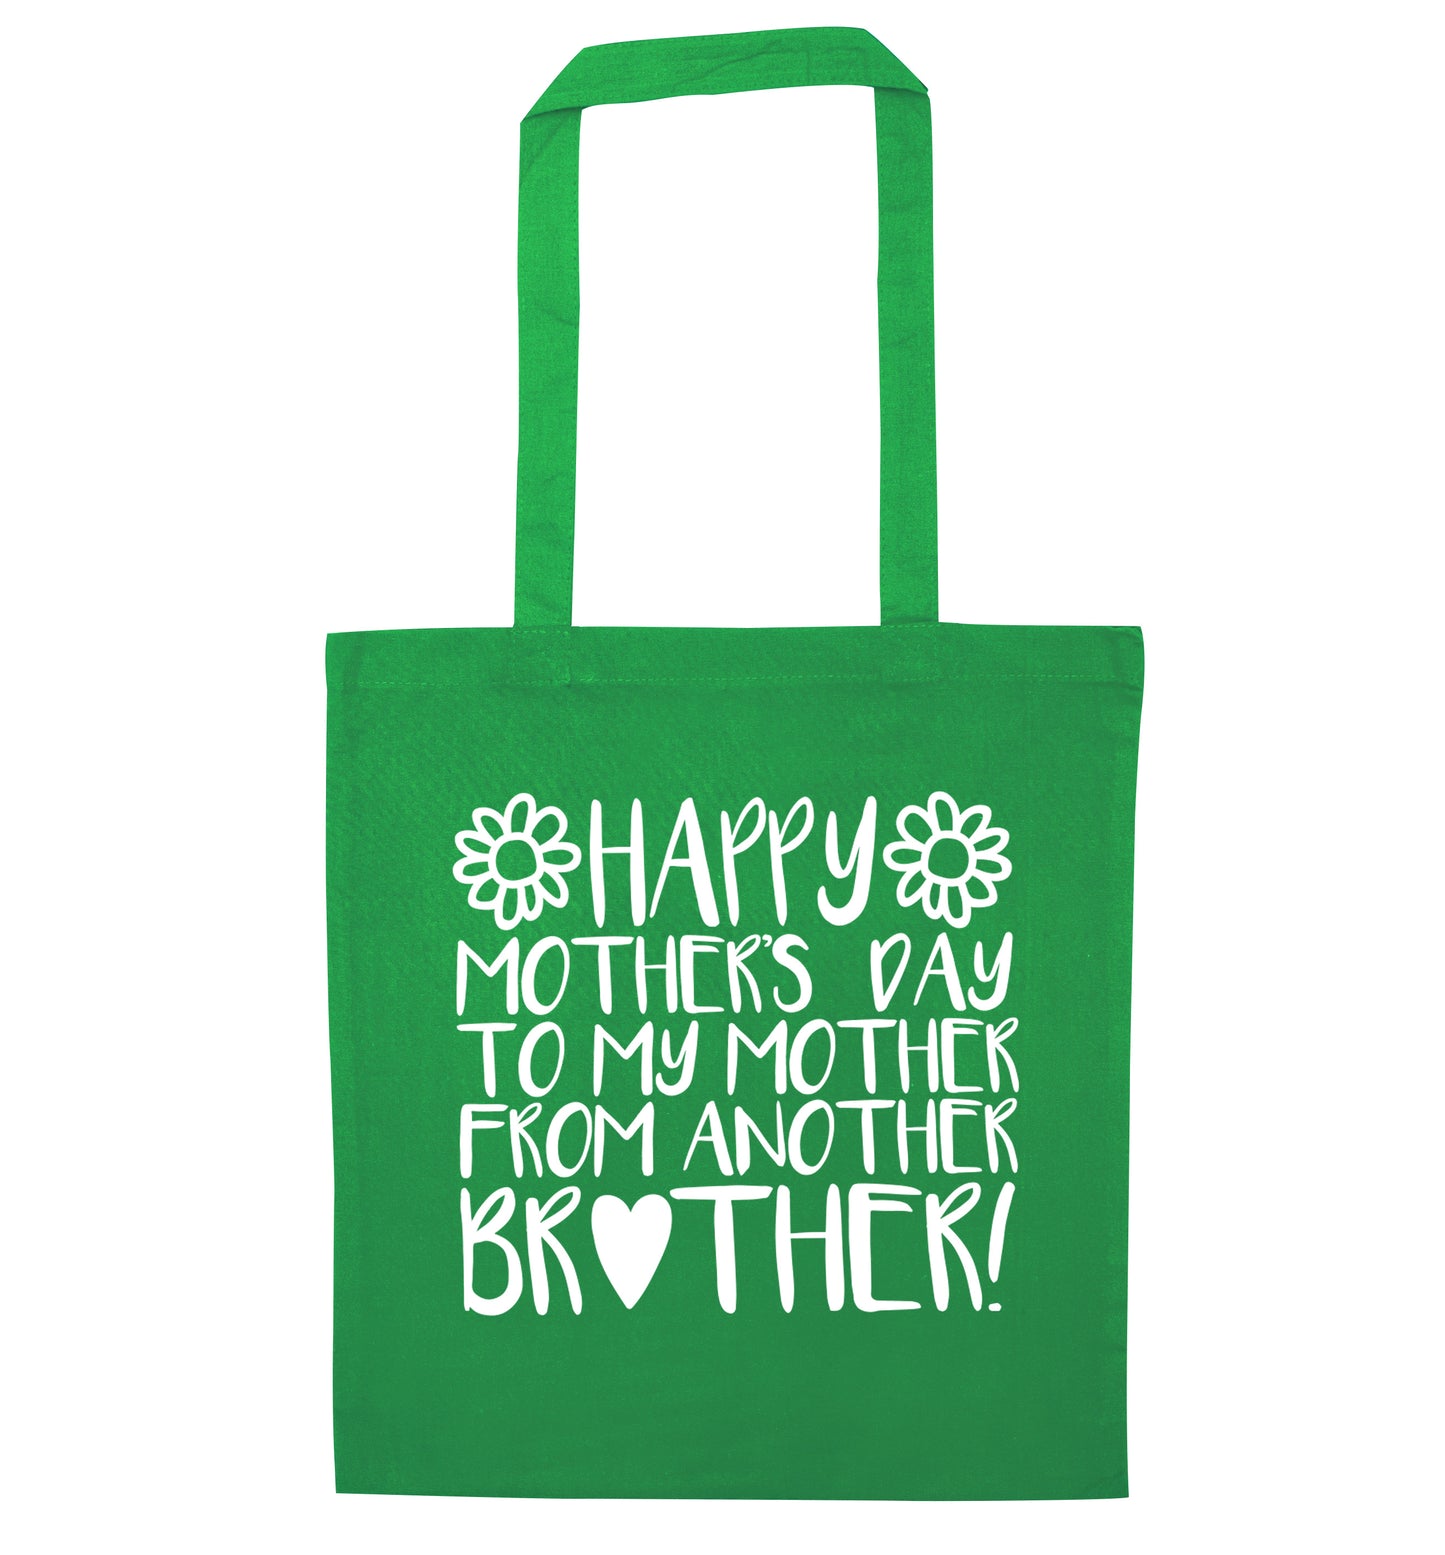 Happy mother's day to my mother from another brother green tote bag